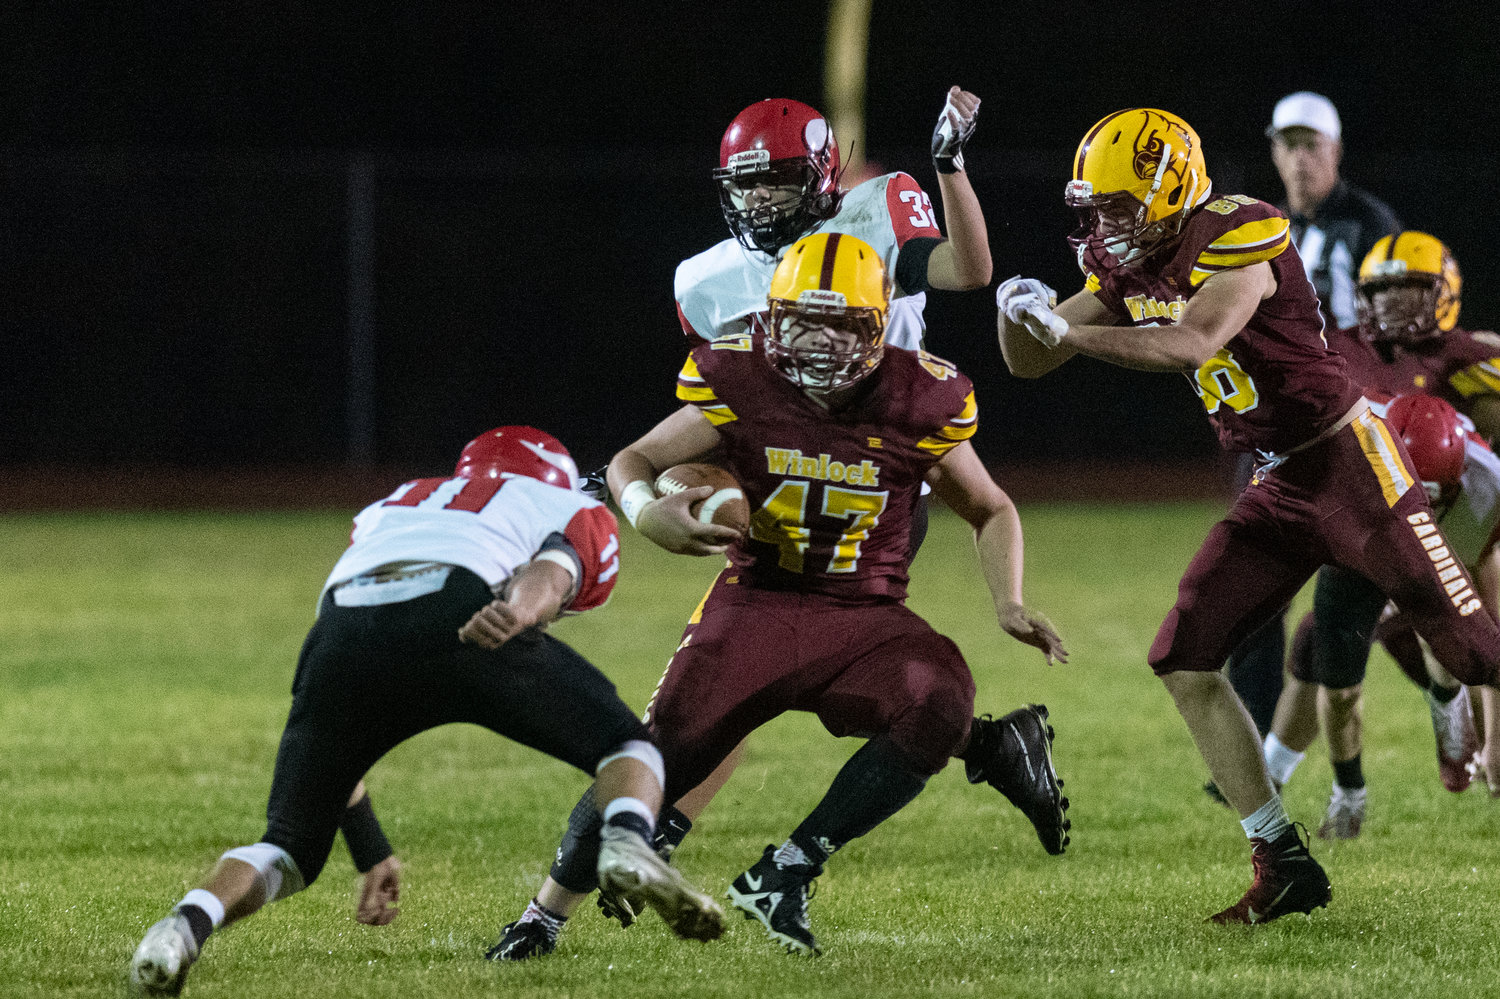 Winlock tailback Nolan Swofford breaks a tackle against Mossyrock Oct. 8.